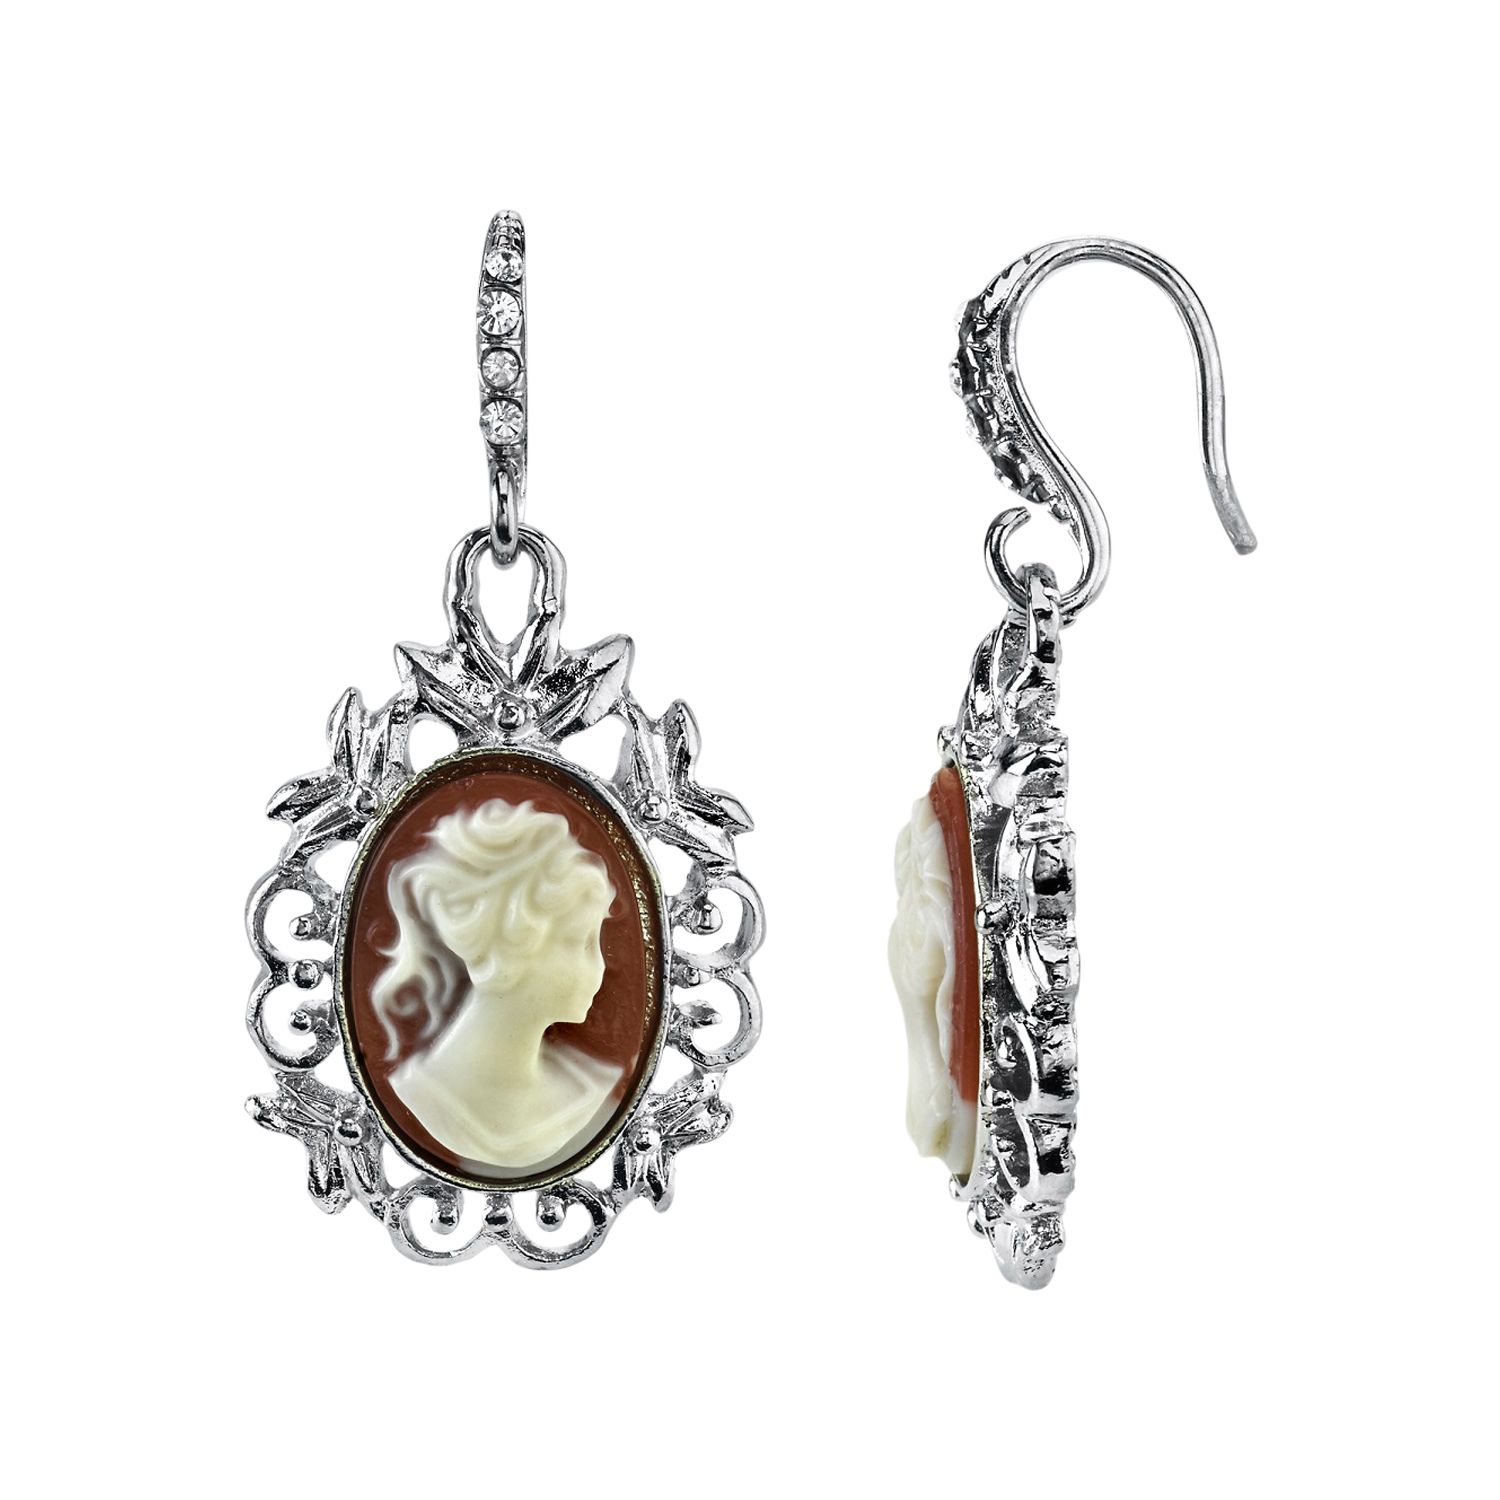 Image for Downton Abbey Filigree Cameo Drop Earrings at Kohl's.